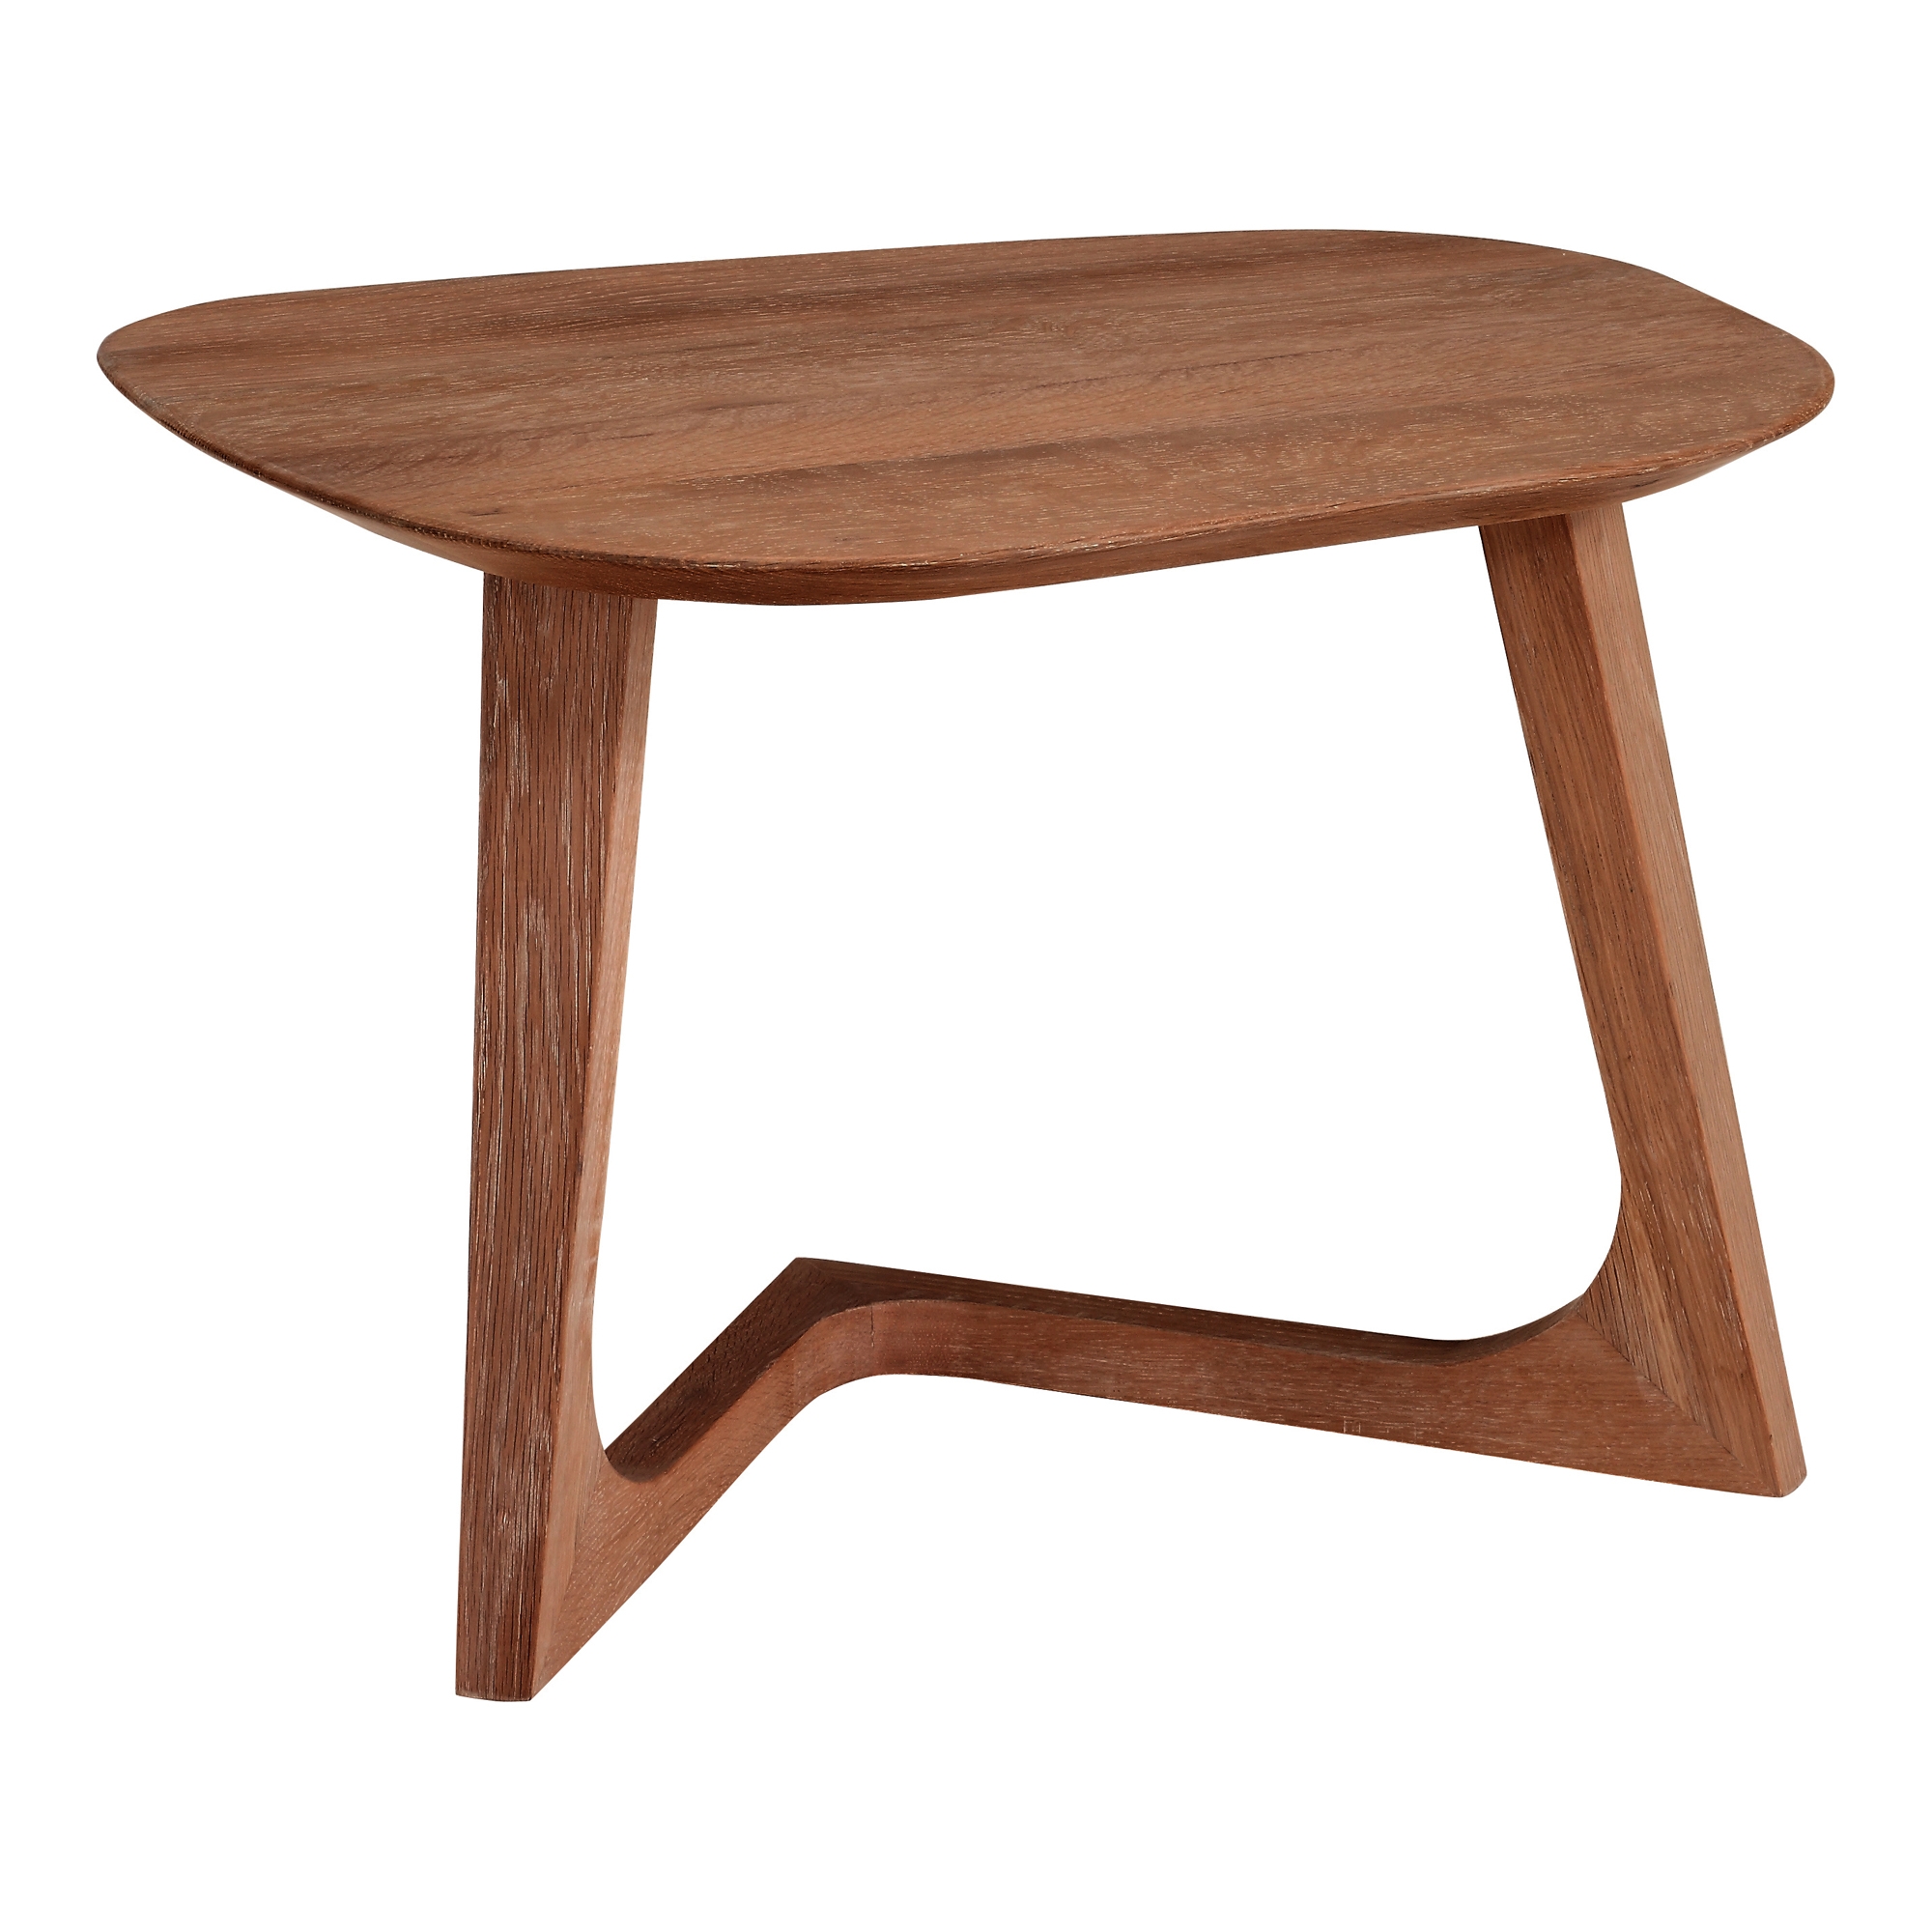 GODENZA END TABLE - Image 1